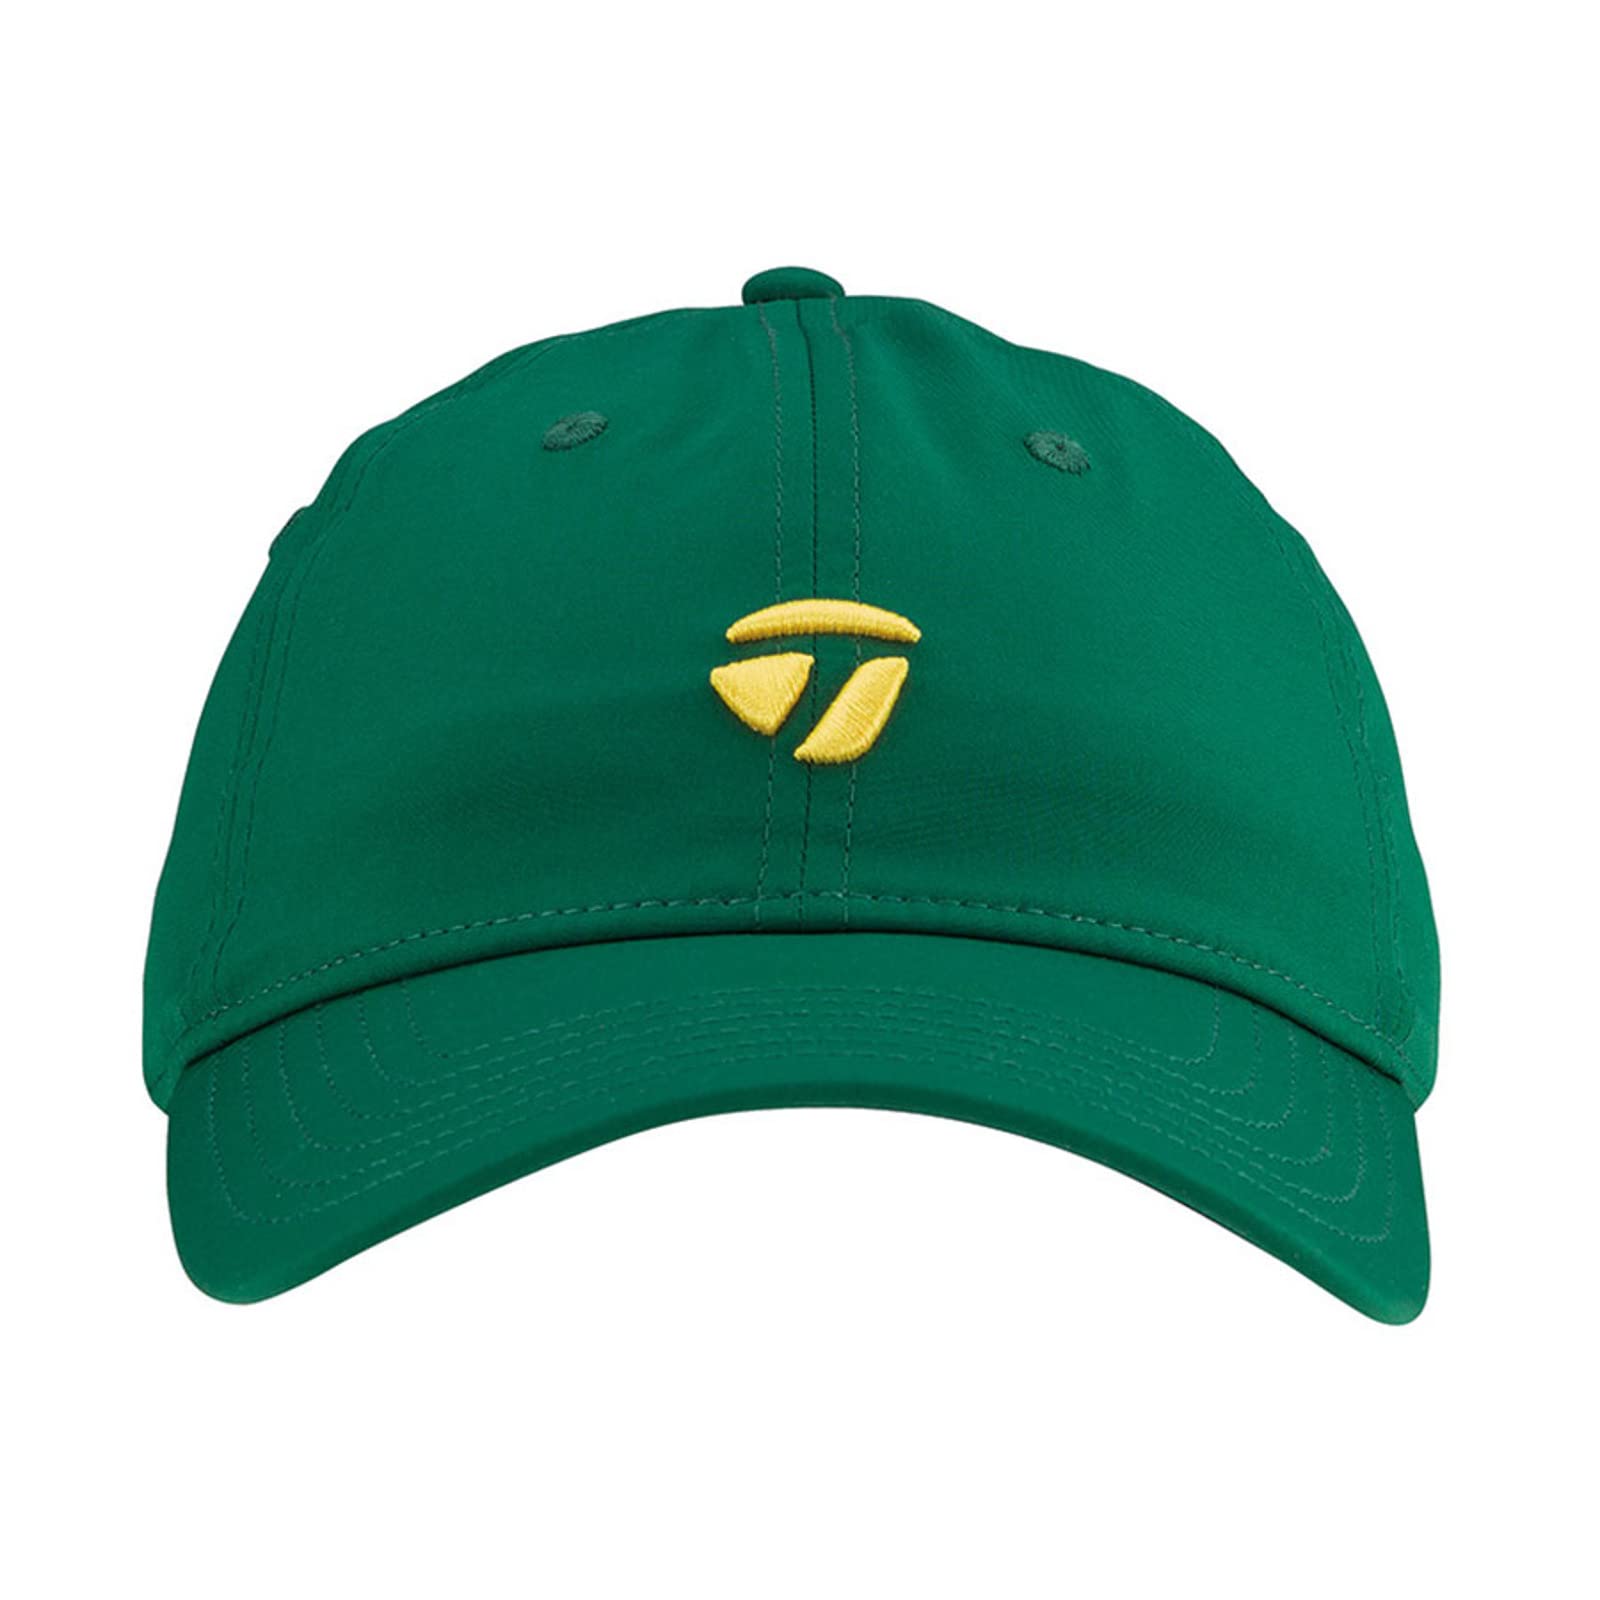 TaylorMade Tbug hat